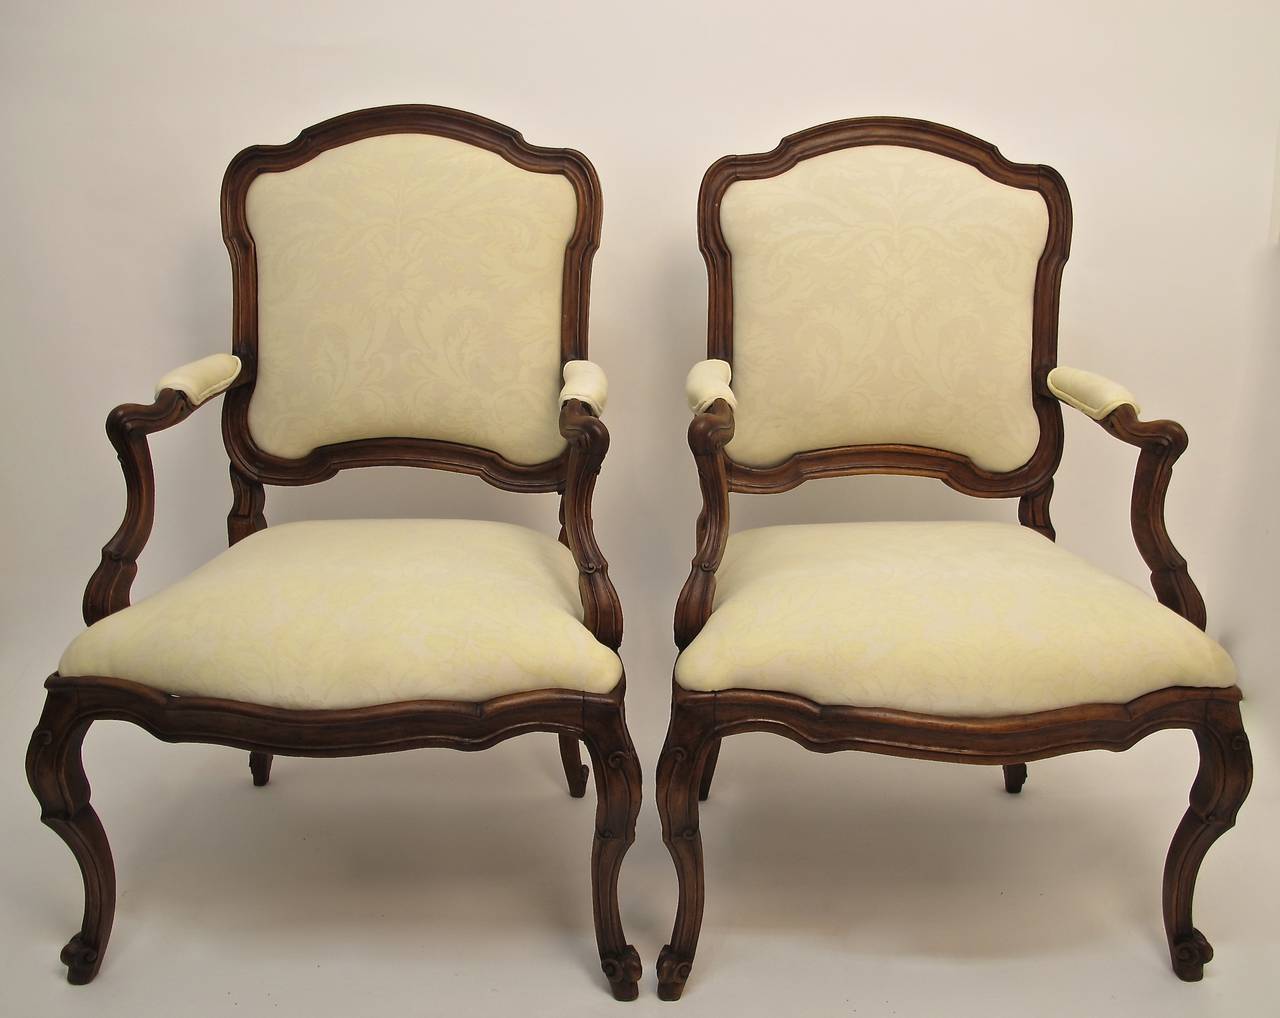 A pair of hand-carved walnut armchairs, recently refinished and newly upholstered with Fortuny fabric. Chairs are sturdy and sound with a generous size seat. Italy, Rococo period, circa 1780.